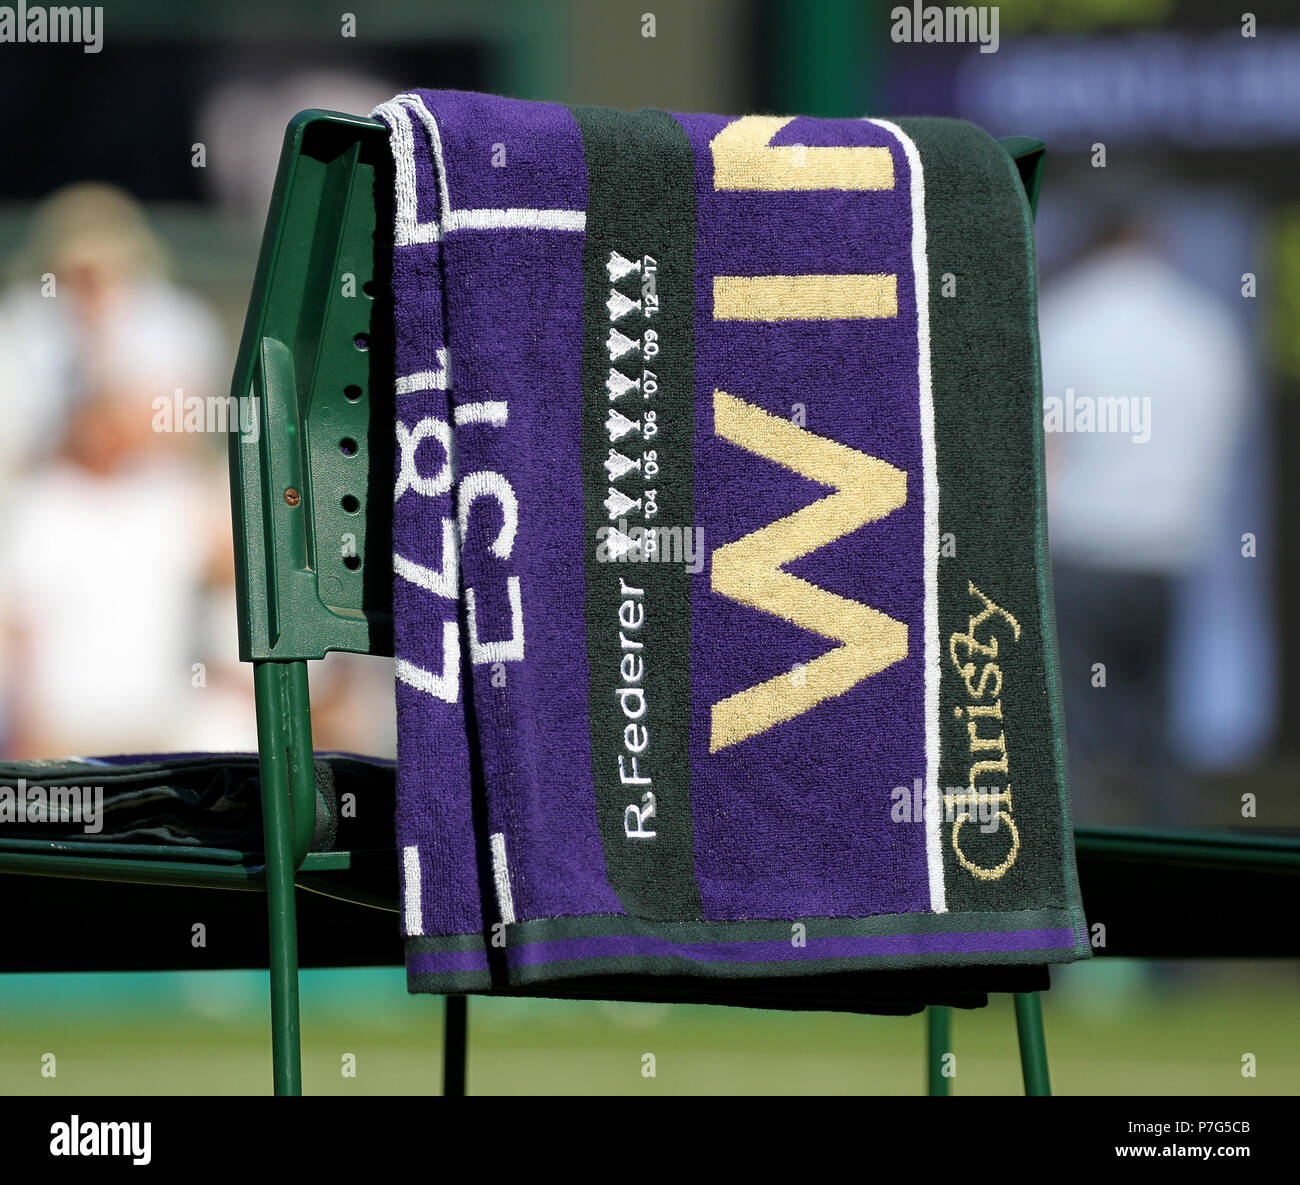 ROGER FEDERER LIMITED EDITION TOWEL, THE WIMBLEDON CHAMPIONSHIPS 2018, THE WIMBLEDON CHAMPIONSHIPS 2018 THE ALL ENGLAND TENNIS CLUB, 2018 Stock Photo